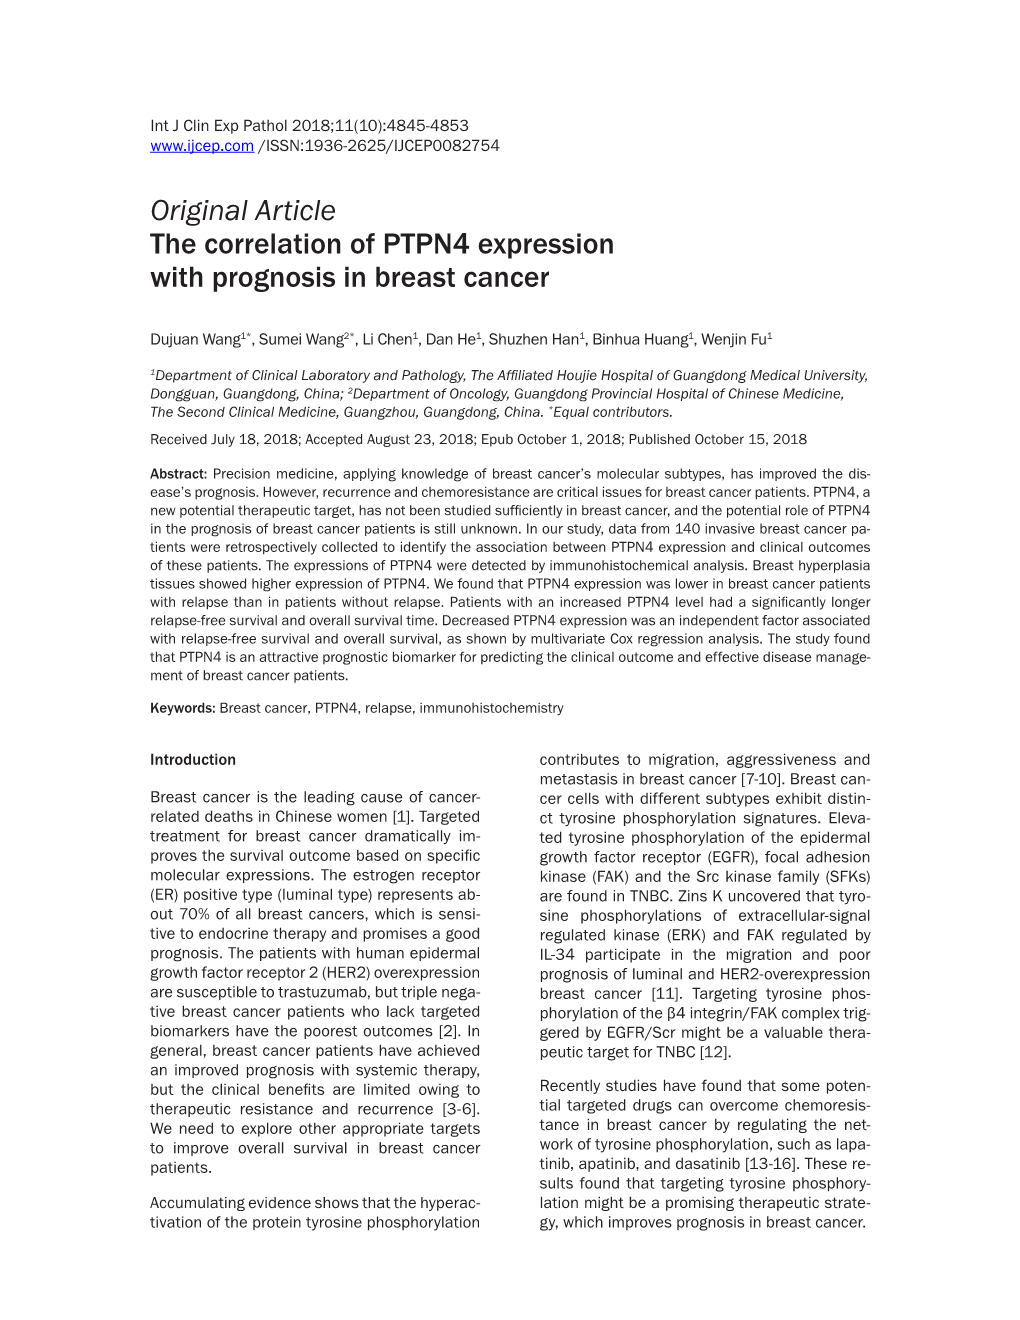 Original Article the Correlation of PTPN4 Expression with Prognosis in Breast Cancer